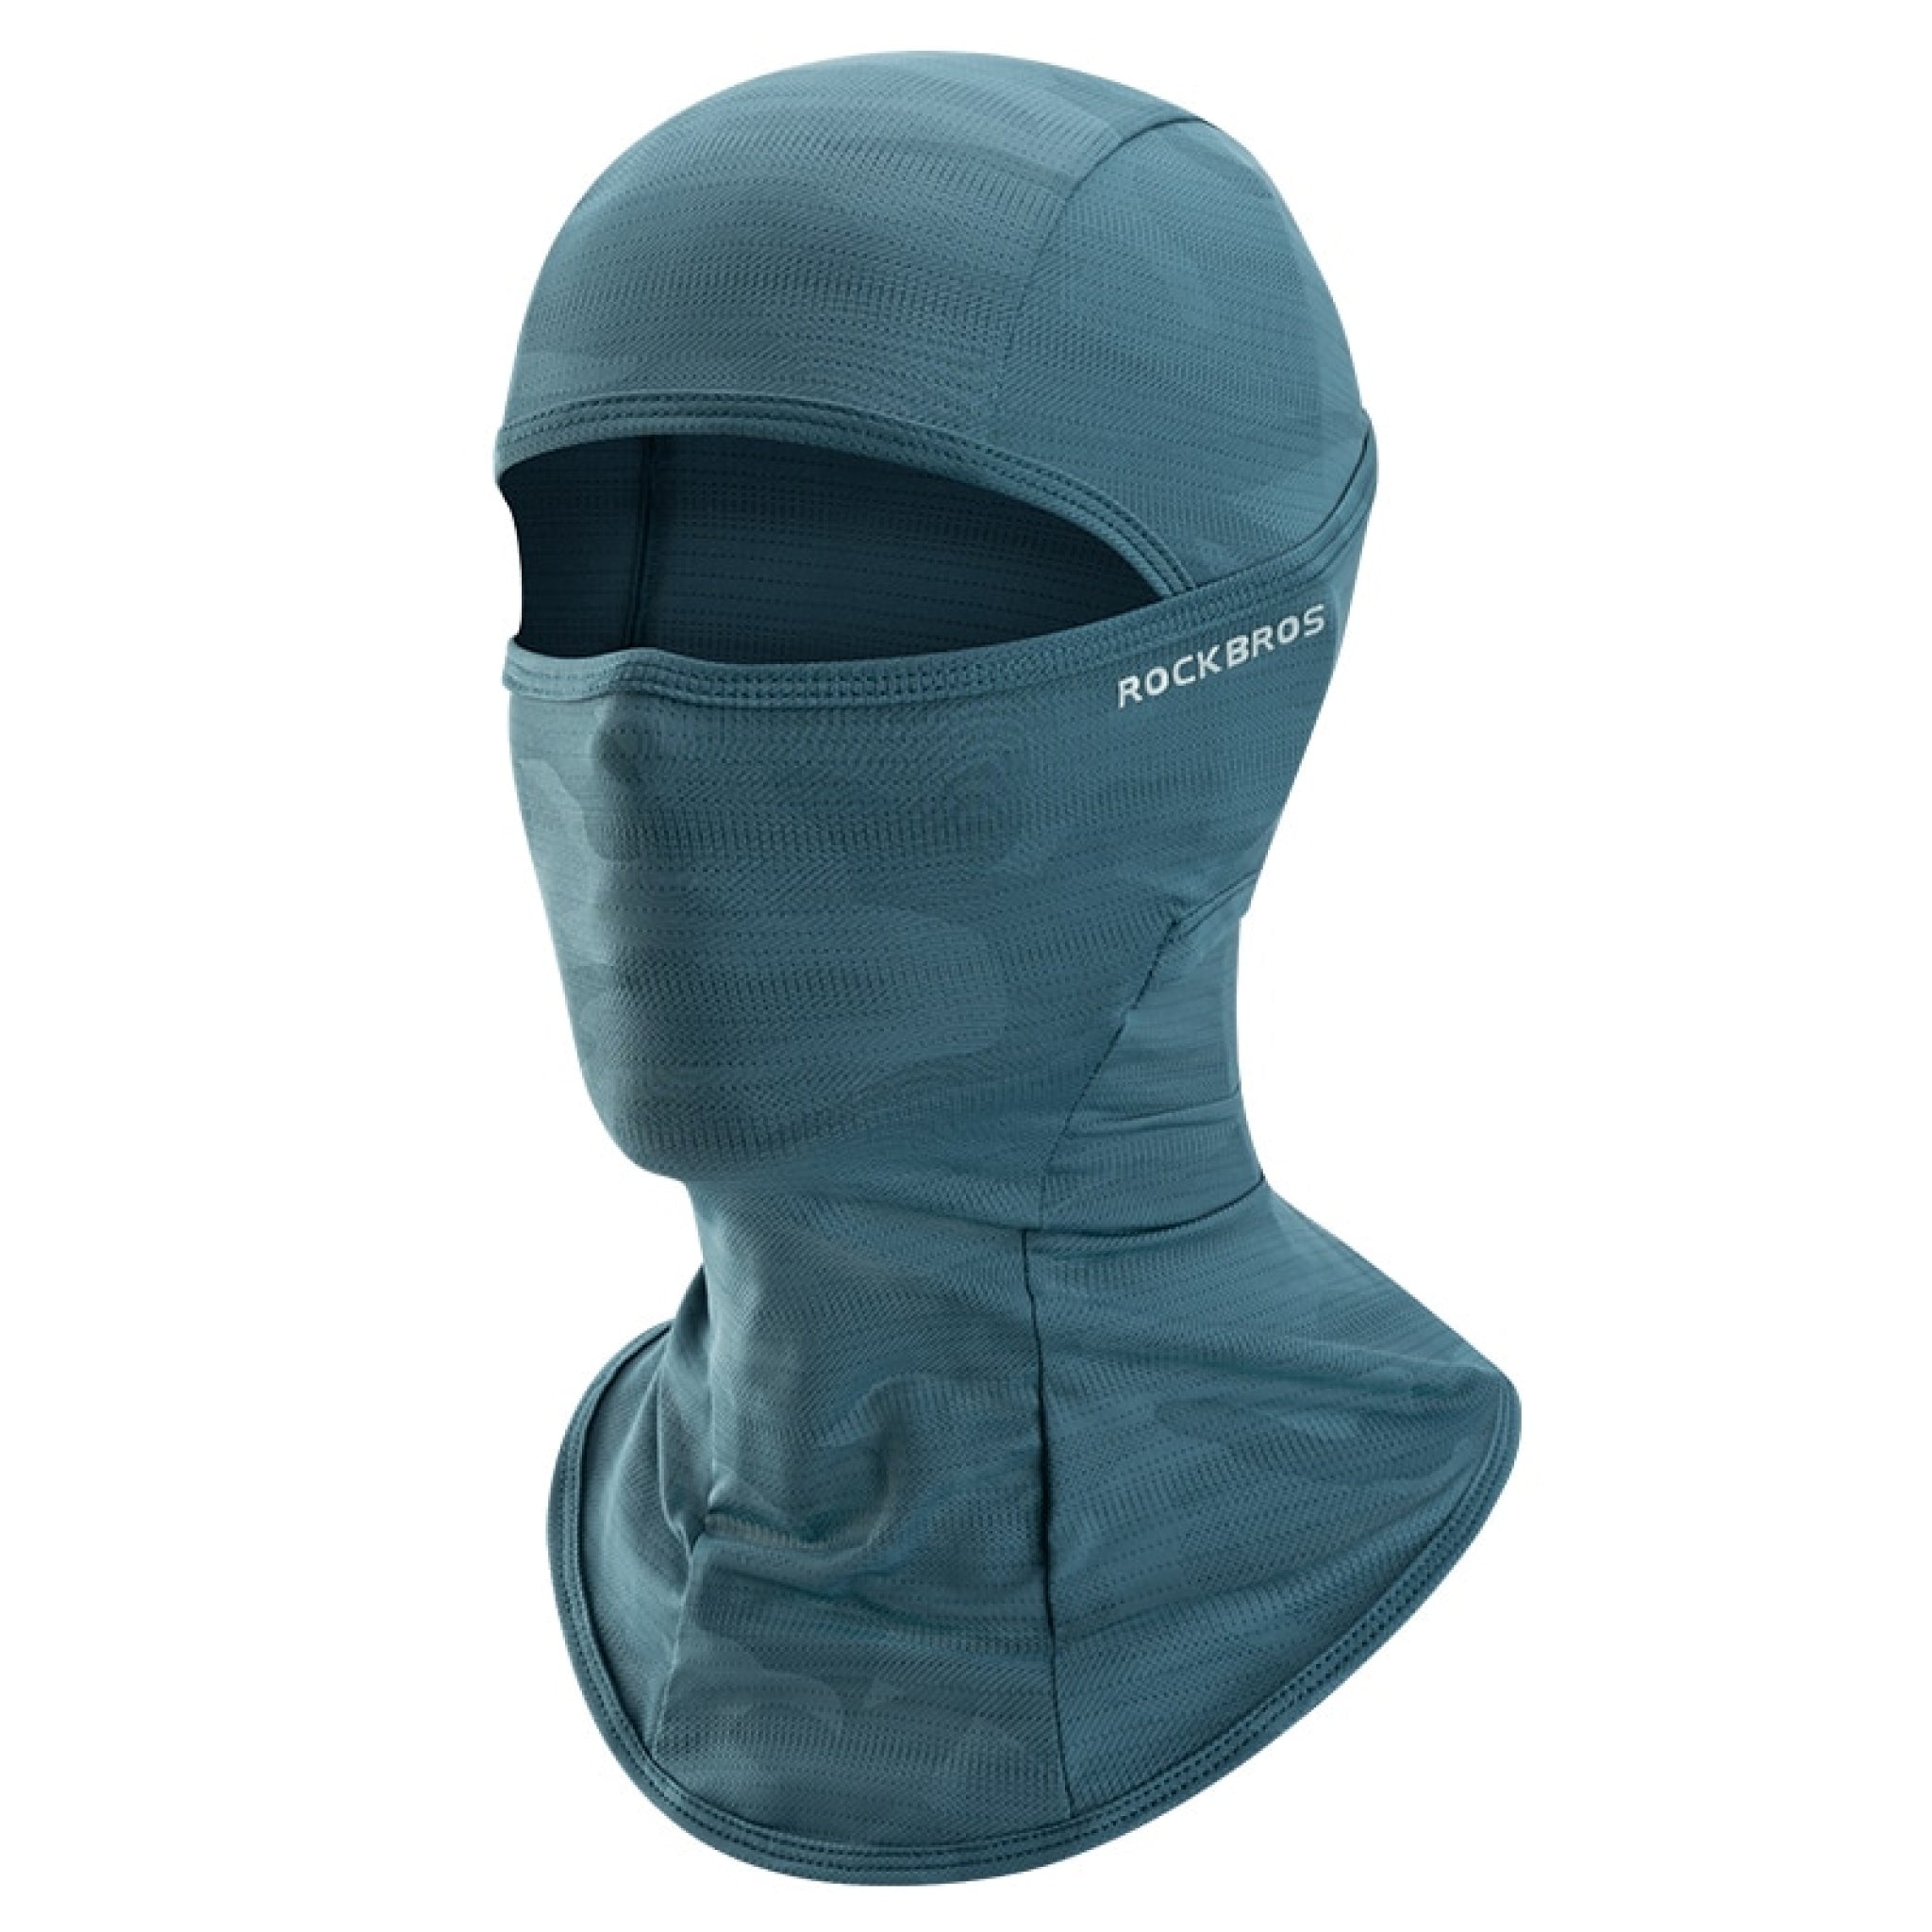 Cagoule protection froid